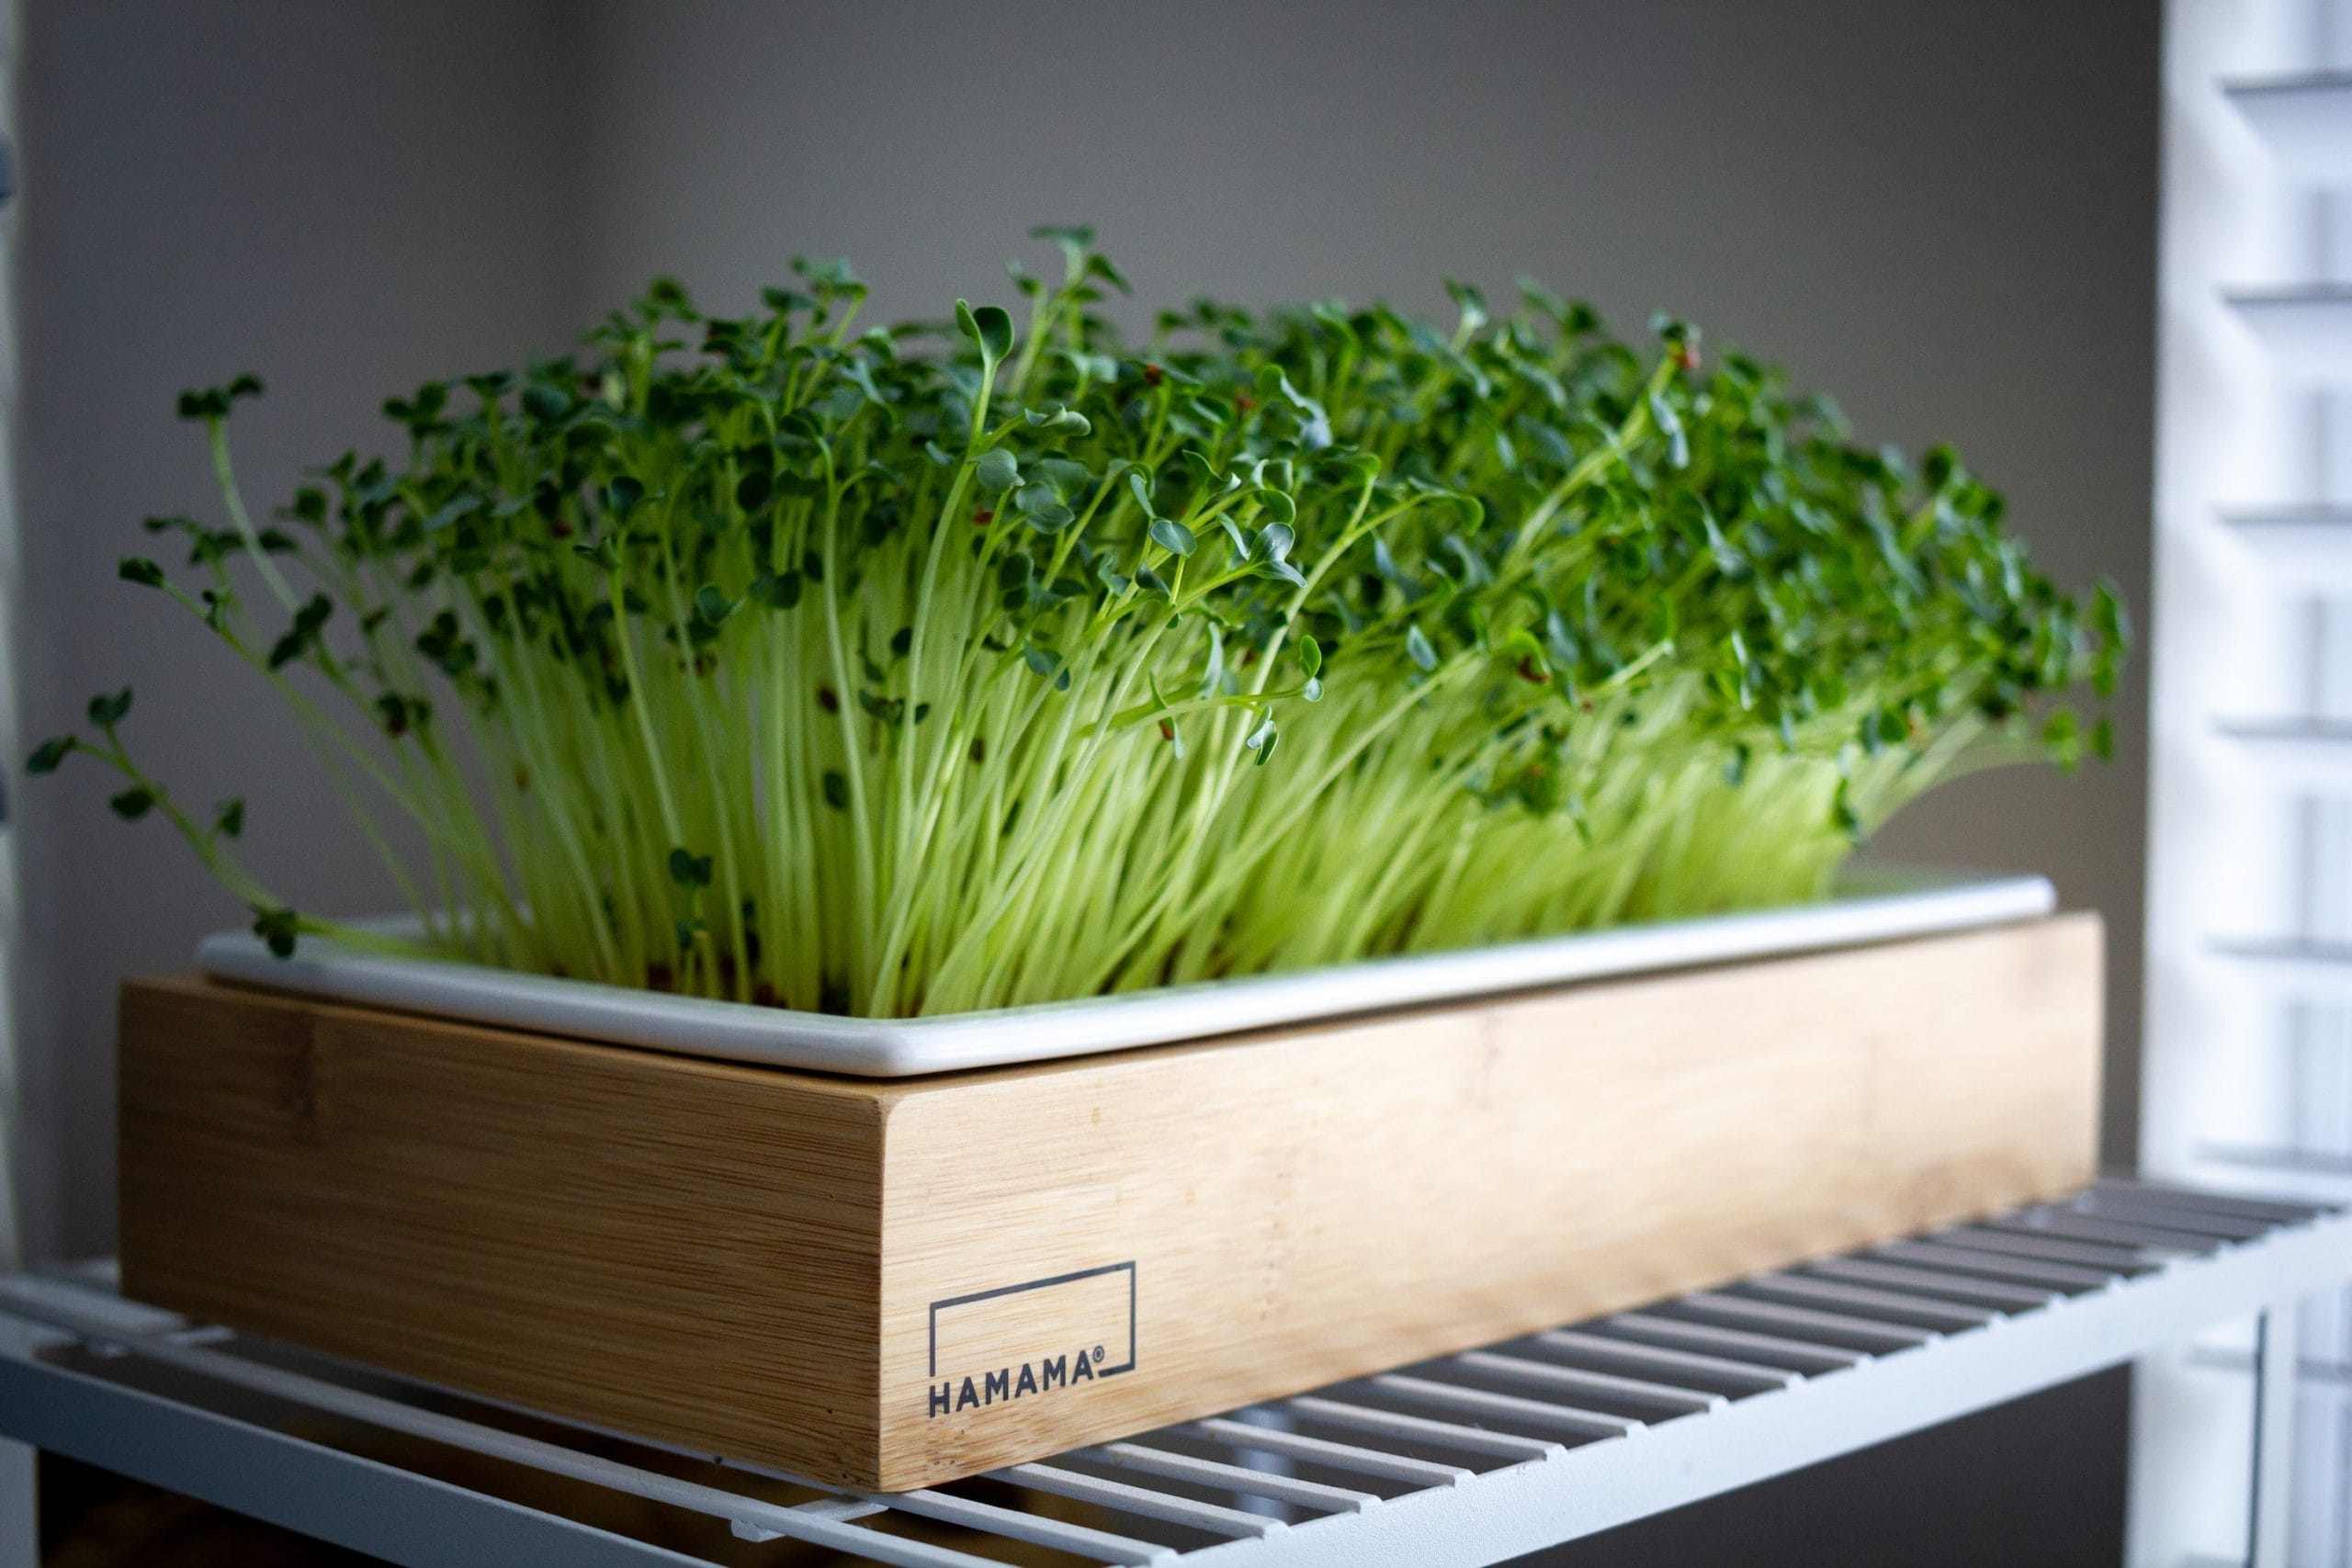 How to Keep Microgreens Fresh and Flavorful? Expert Advice